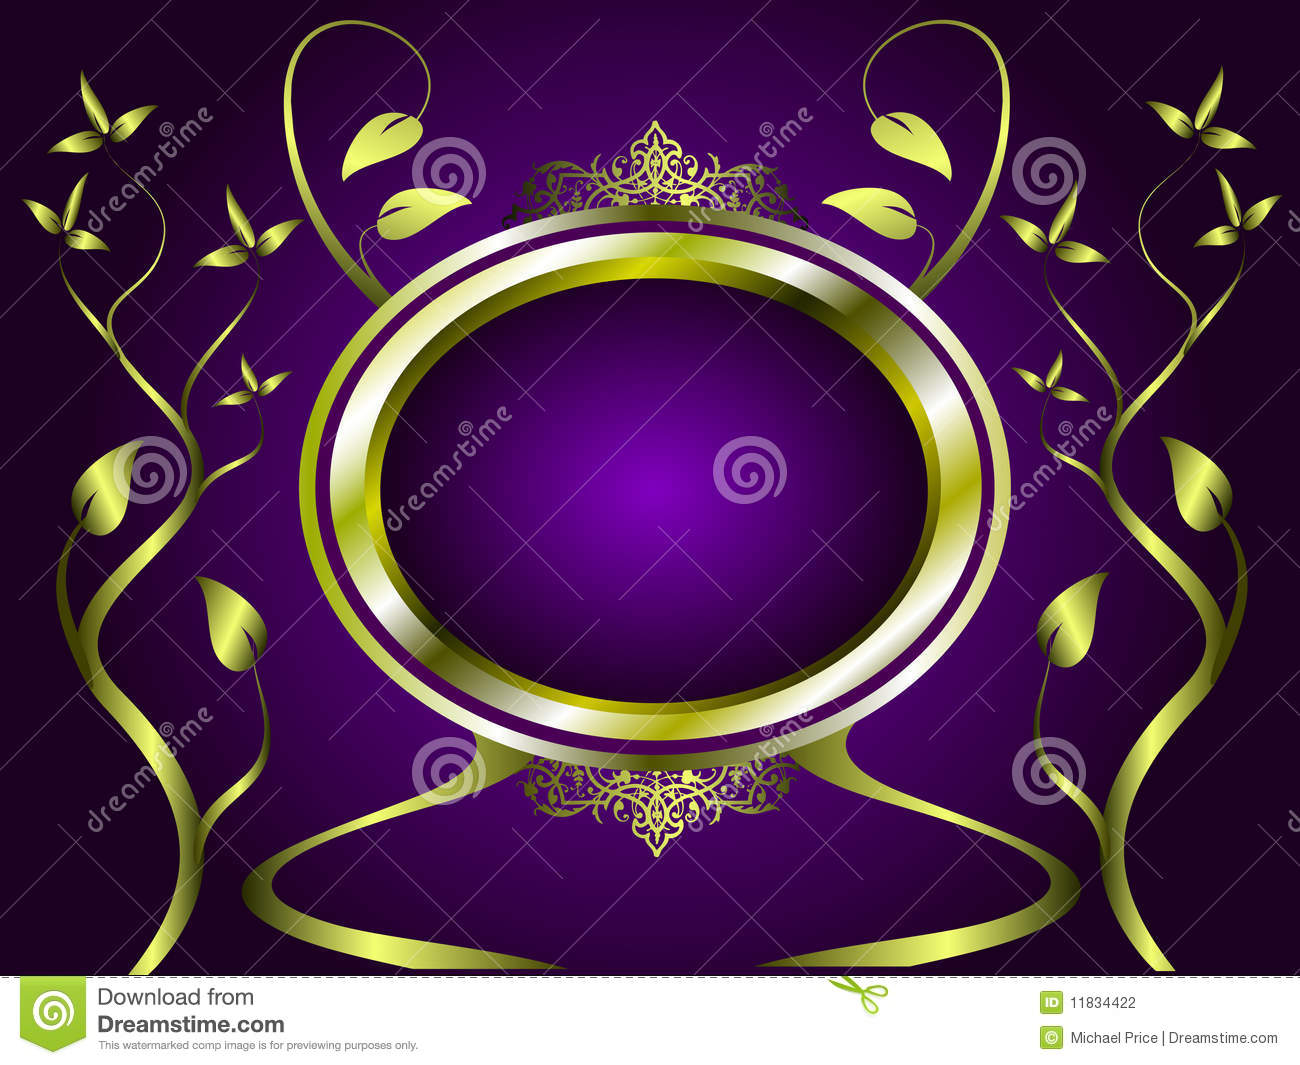 Purple and Gold Abstract